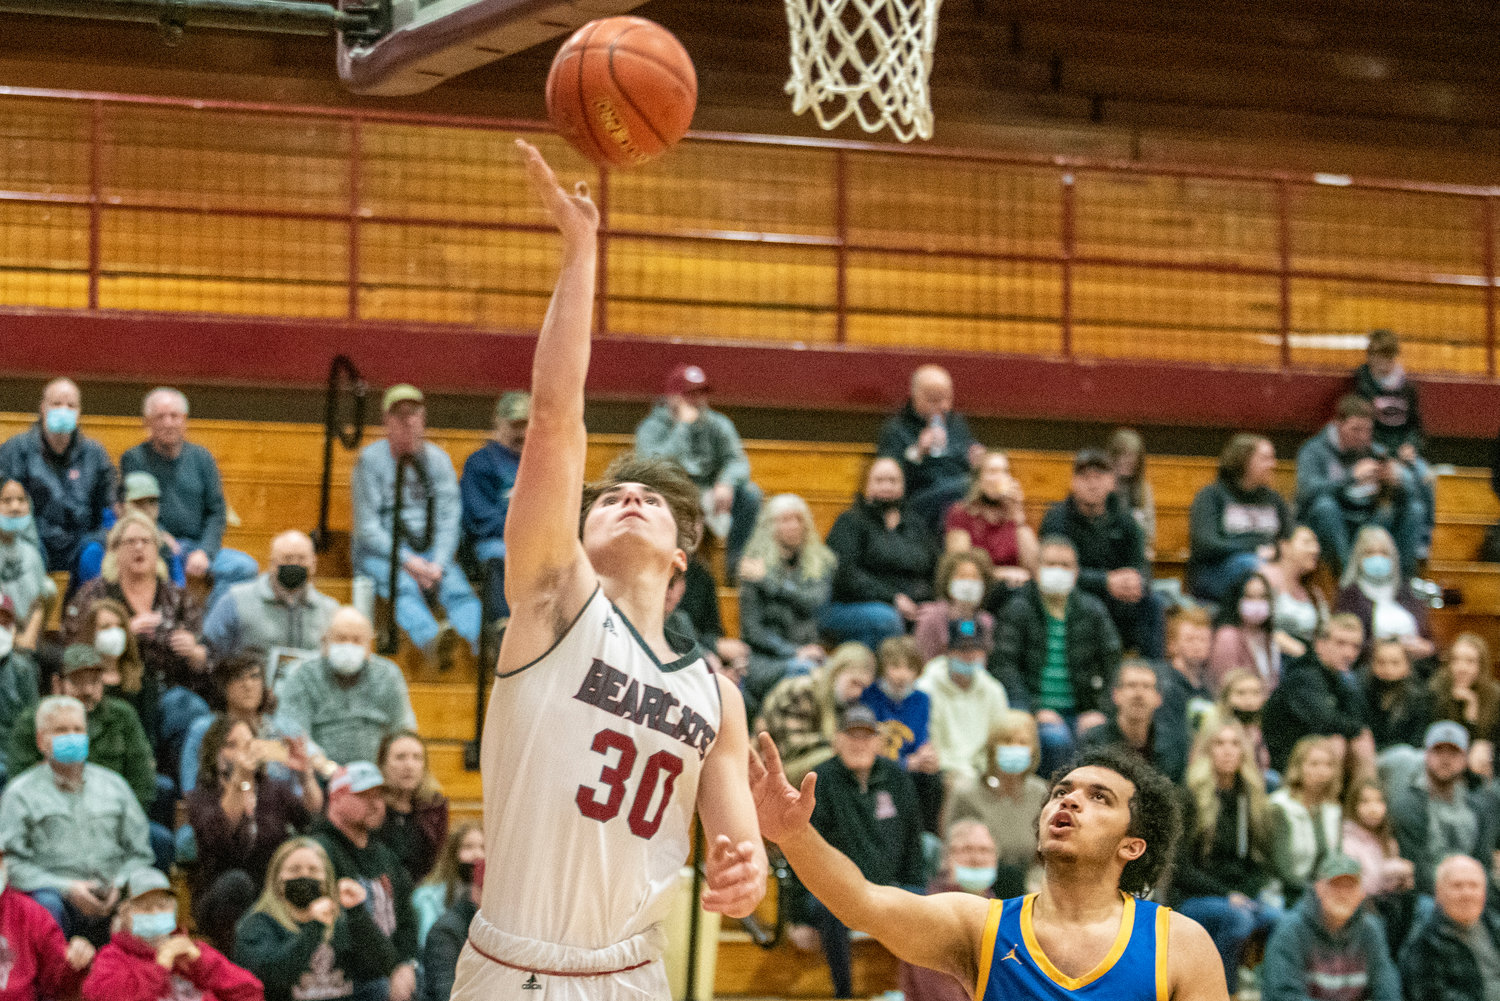 W.F. West senior Austin Snyder (30) leaps for a layup against Rochester on Feb. 4.